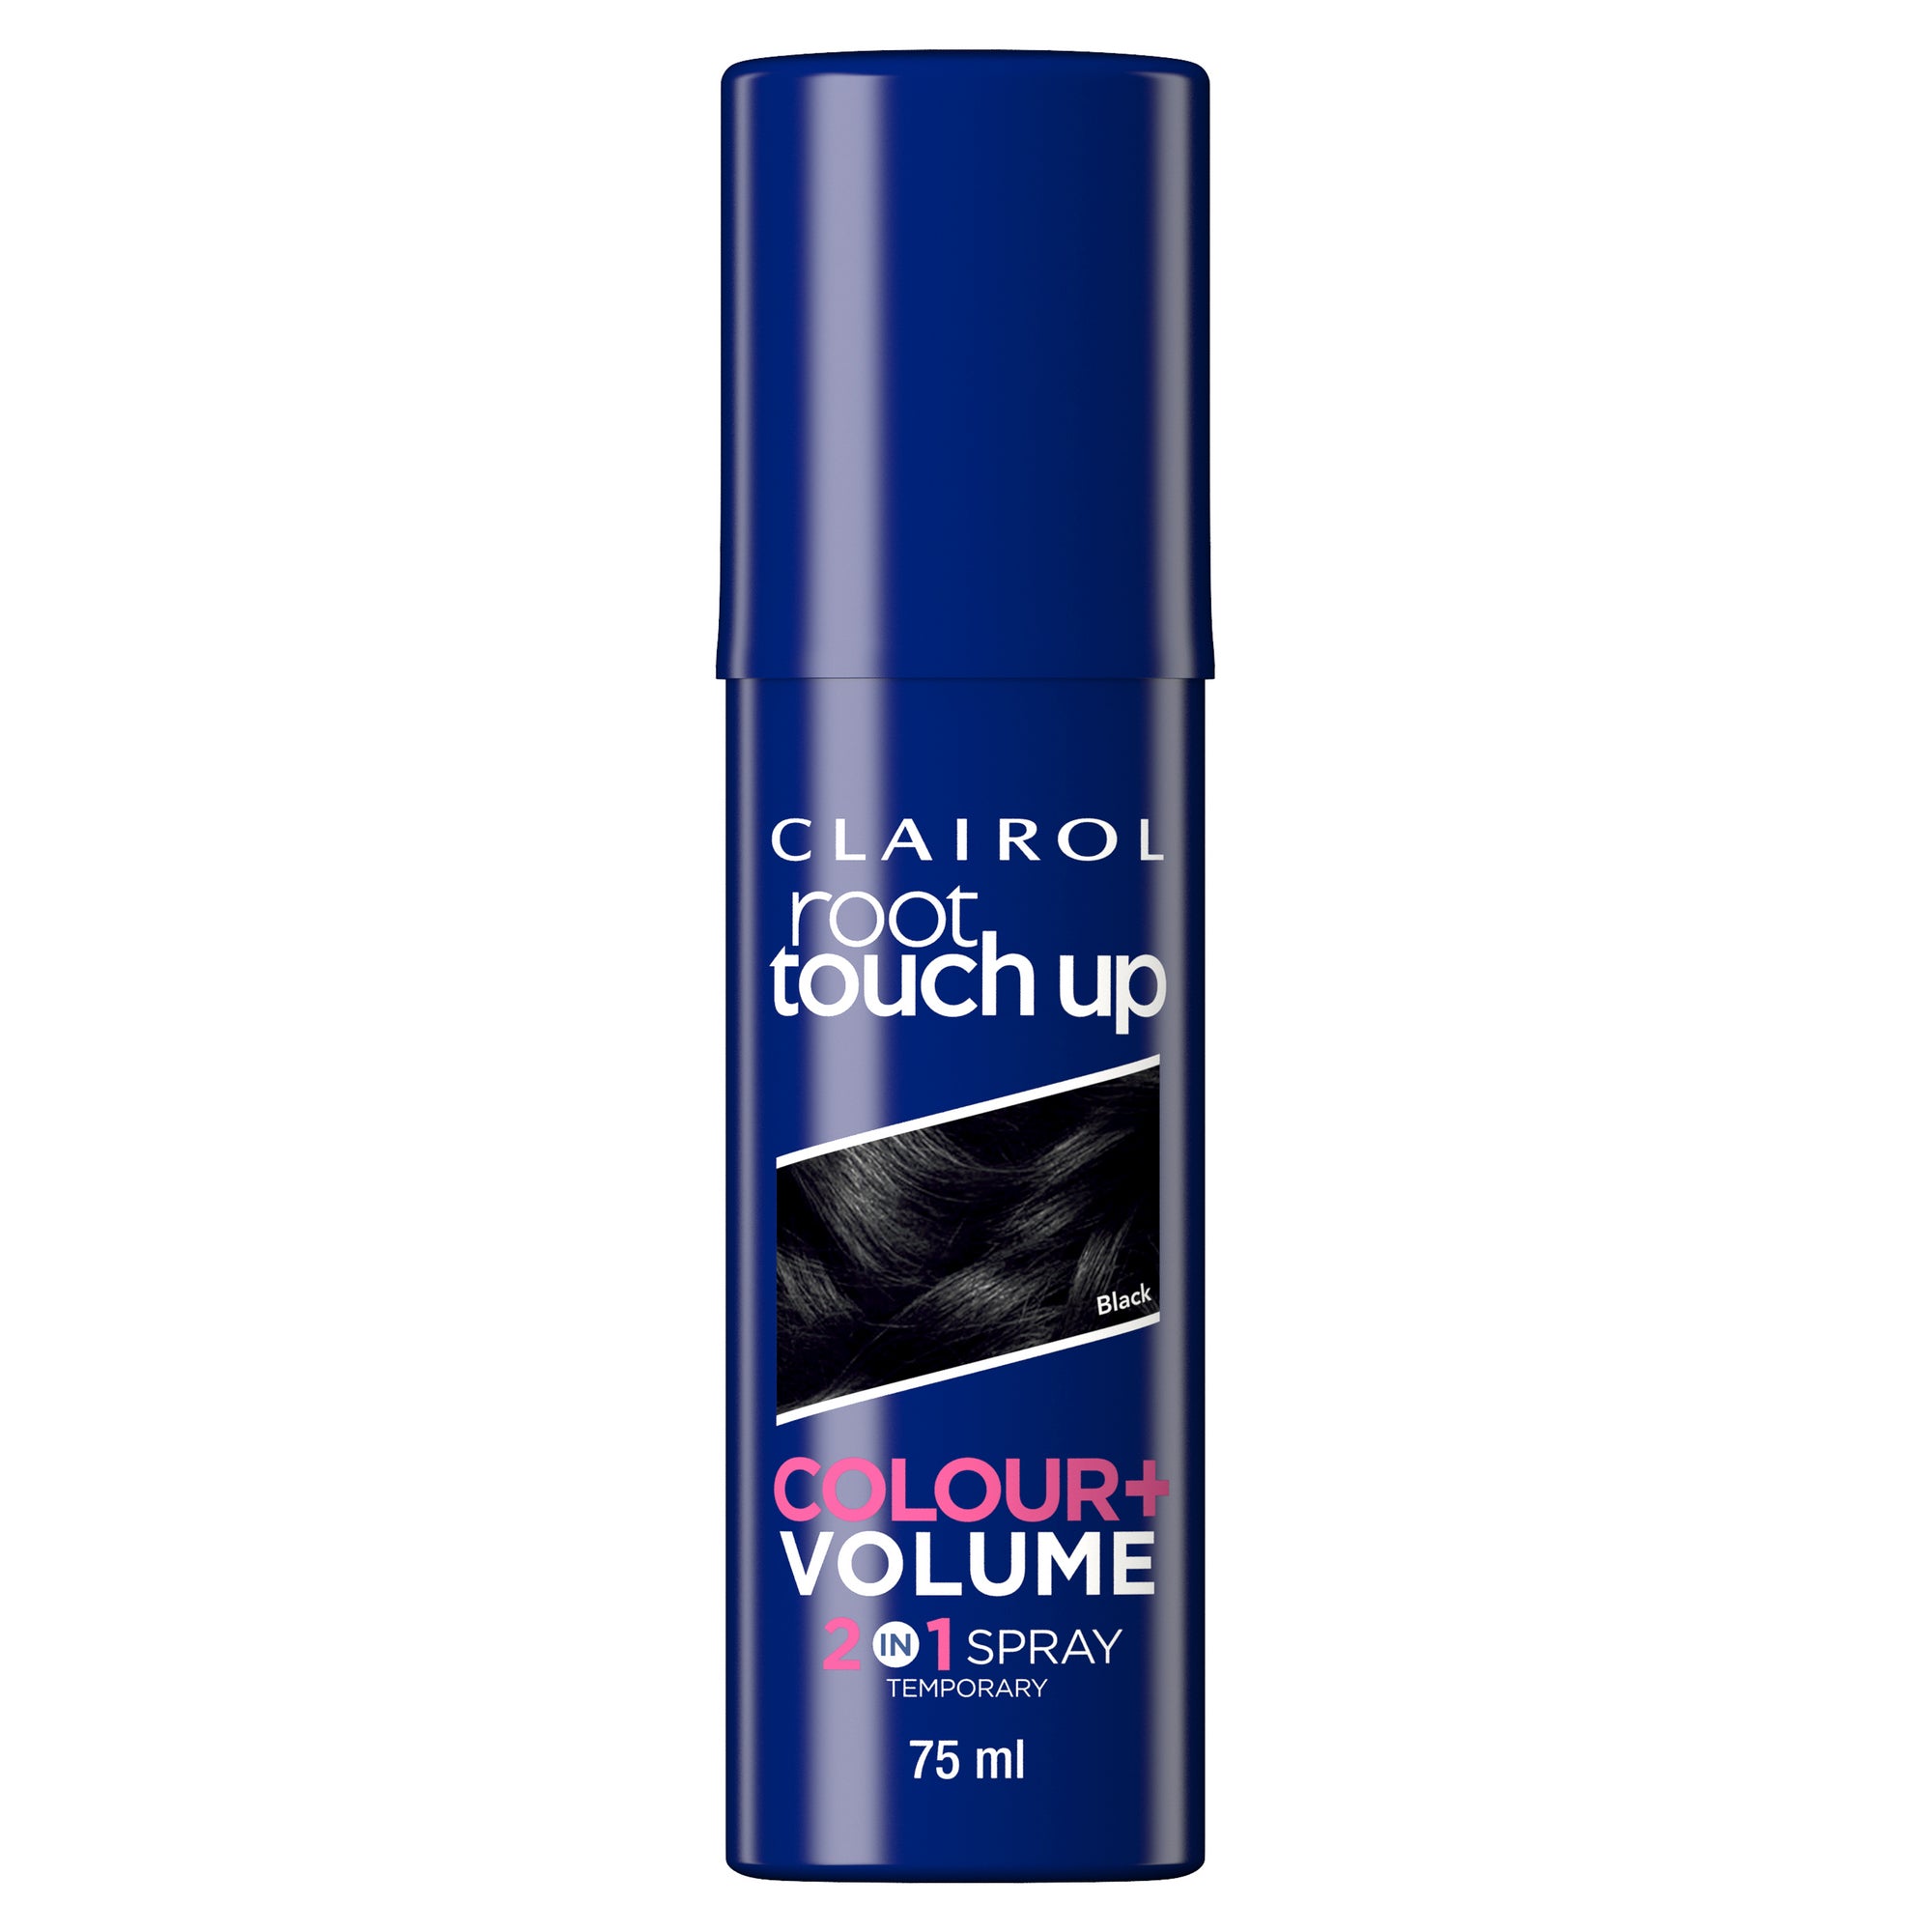 Clairol Root Touch Up Color + Volume 2 in 1 Spray 75ml Black